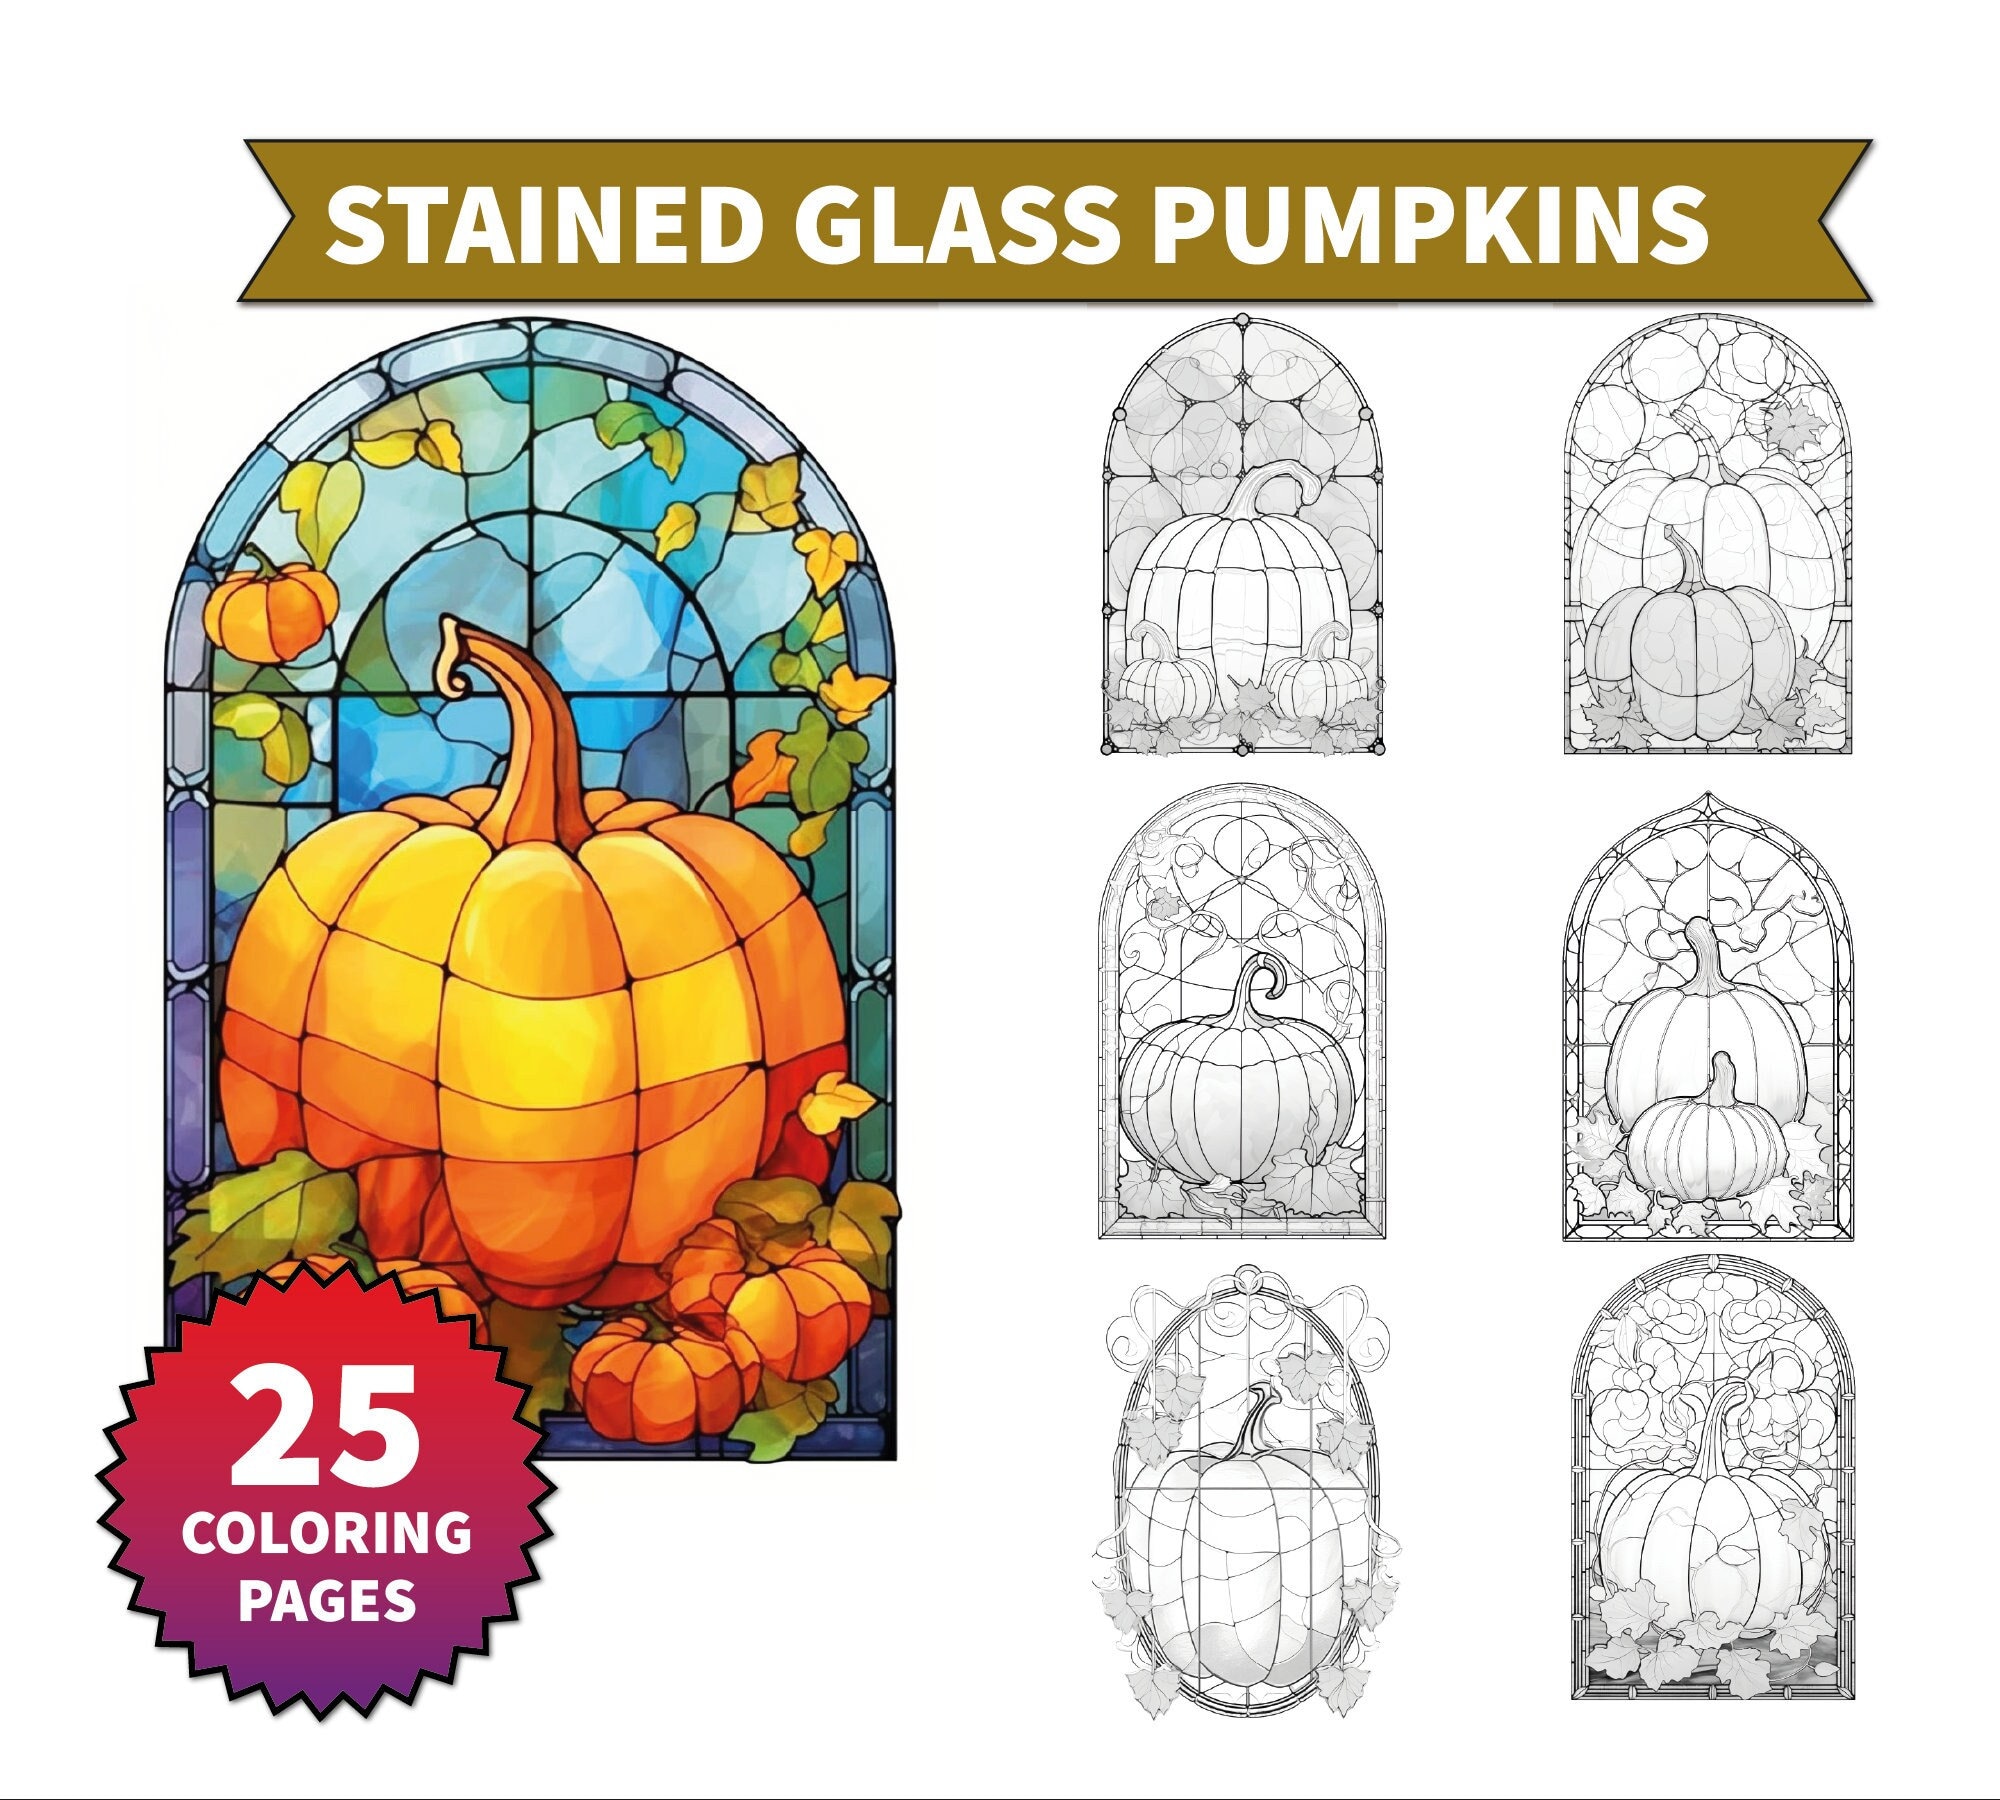 Stained glass pumpkins fantasy autumn coloring page for